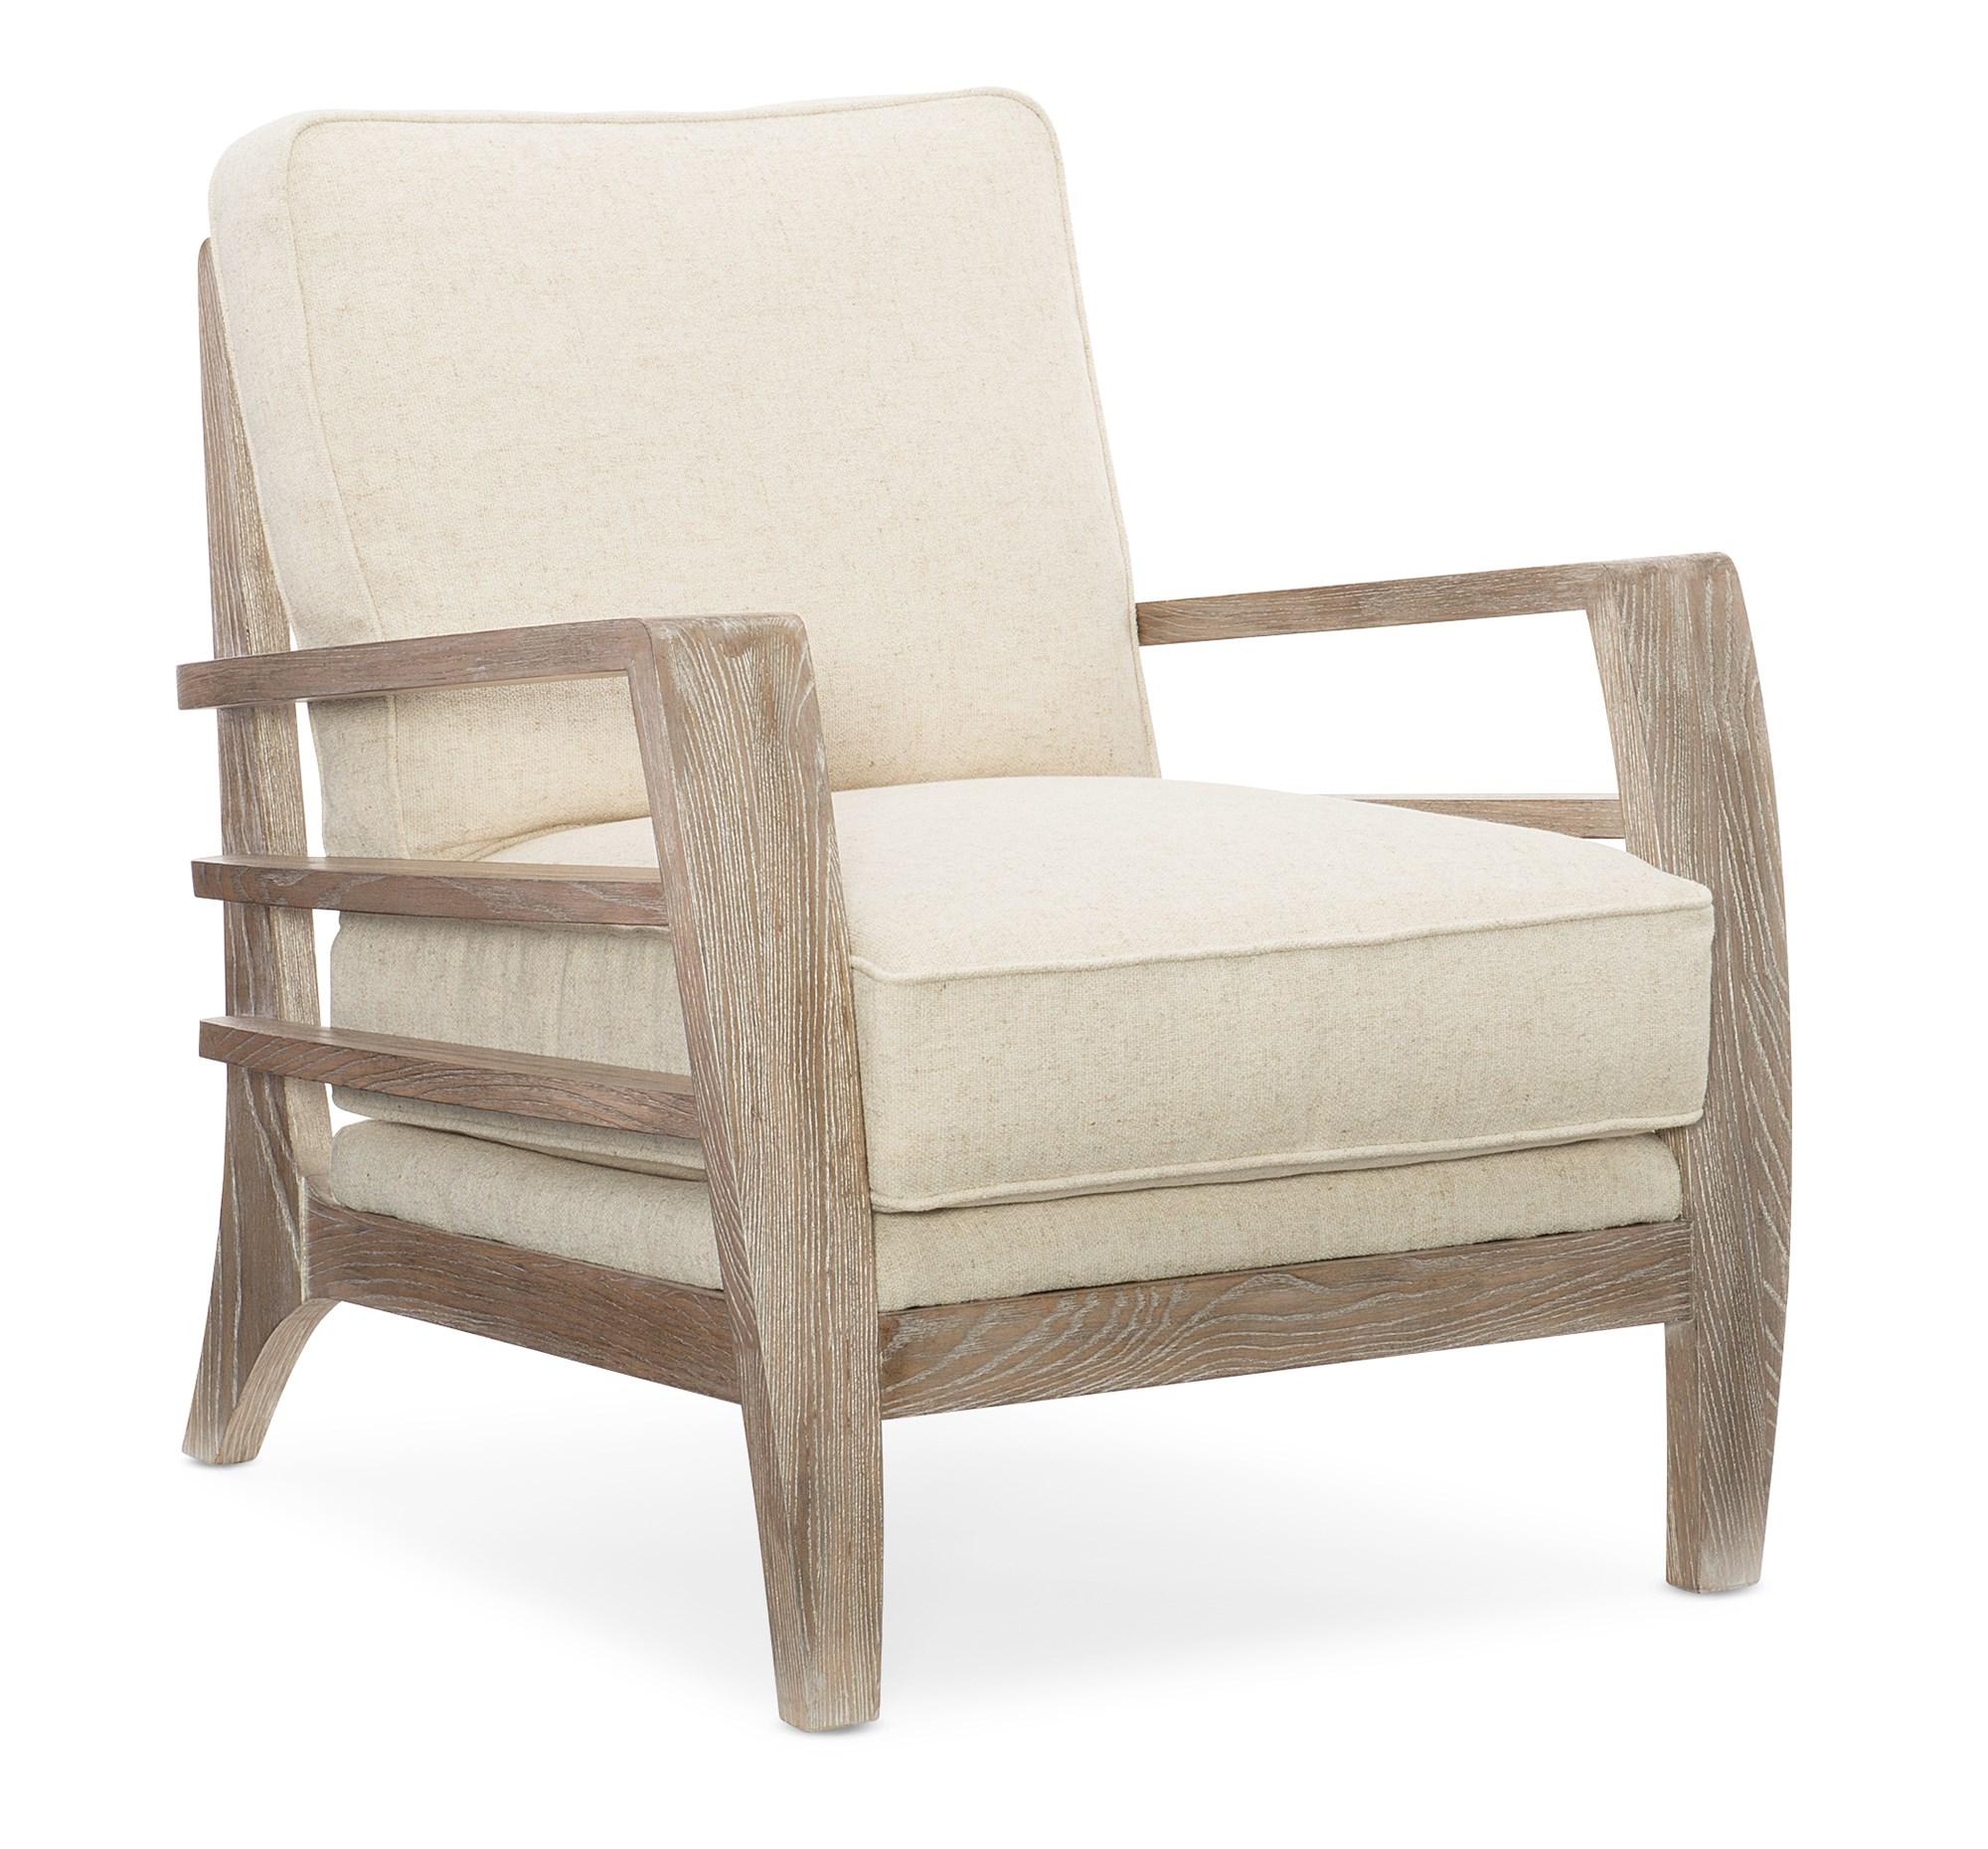 Rustic Accent Chair SLATITUDE UPH-019-135-A in Driftwood, Natural Fabric